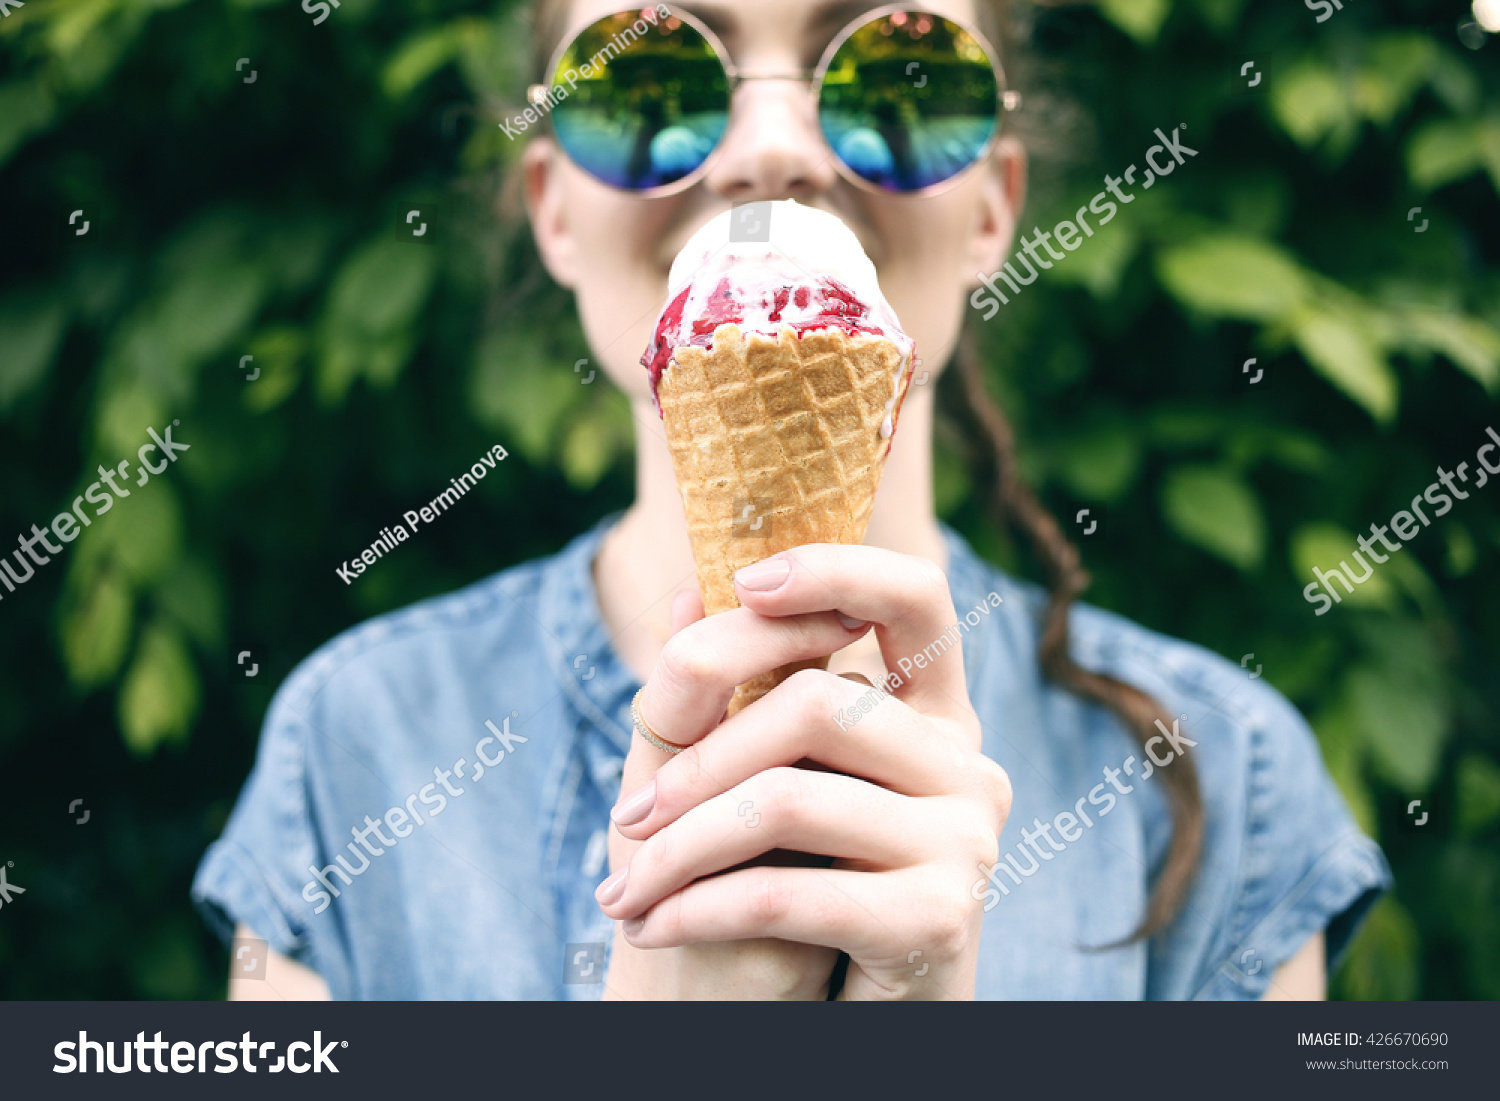 Outdoor closeup fashion portrait of young hipster crazy girl eating ice cream in summer hot weather in round mirror sunglasses have fun and good mood. Toned style instagram filters #426670690